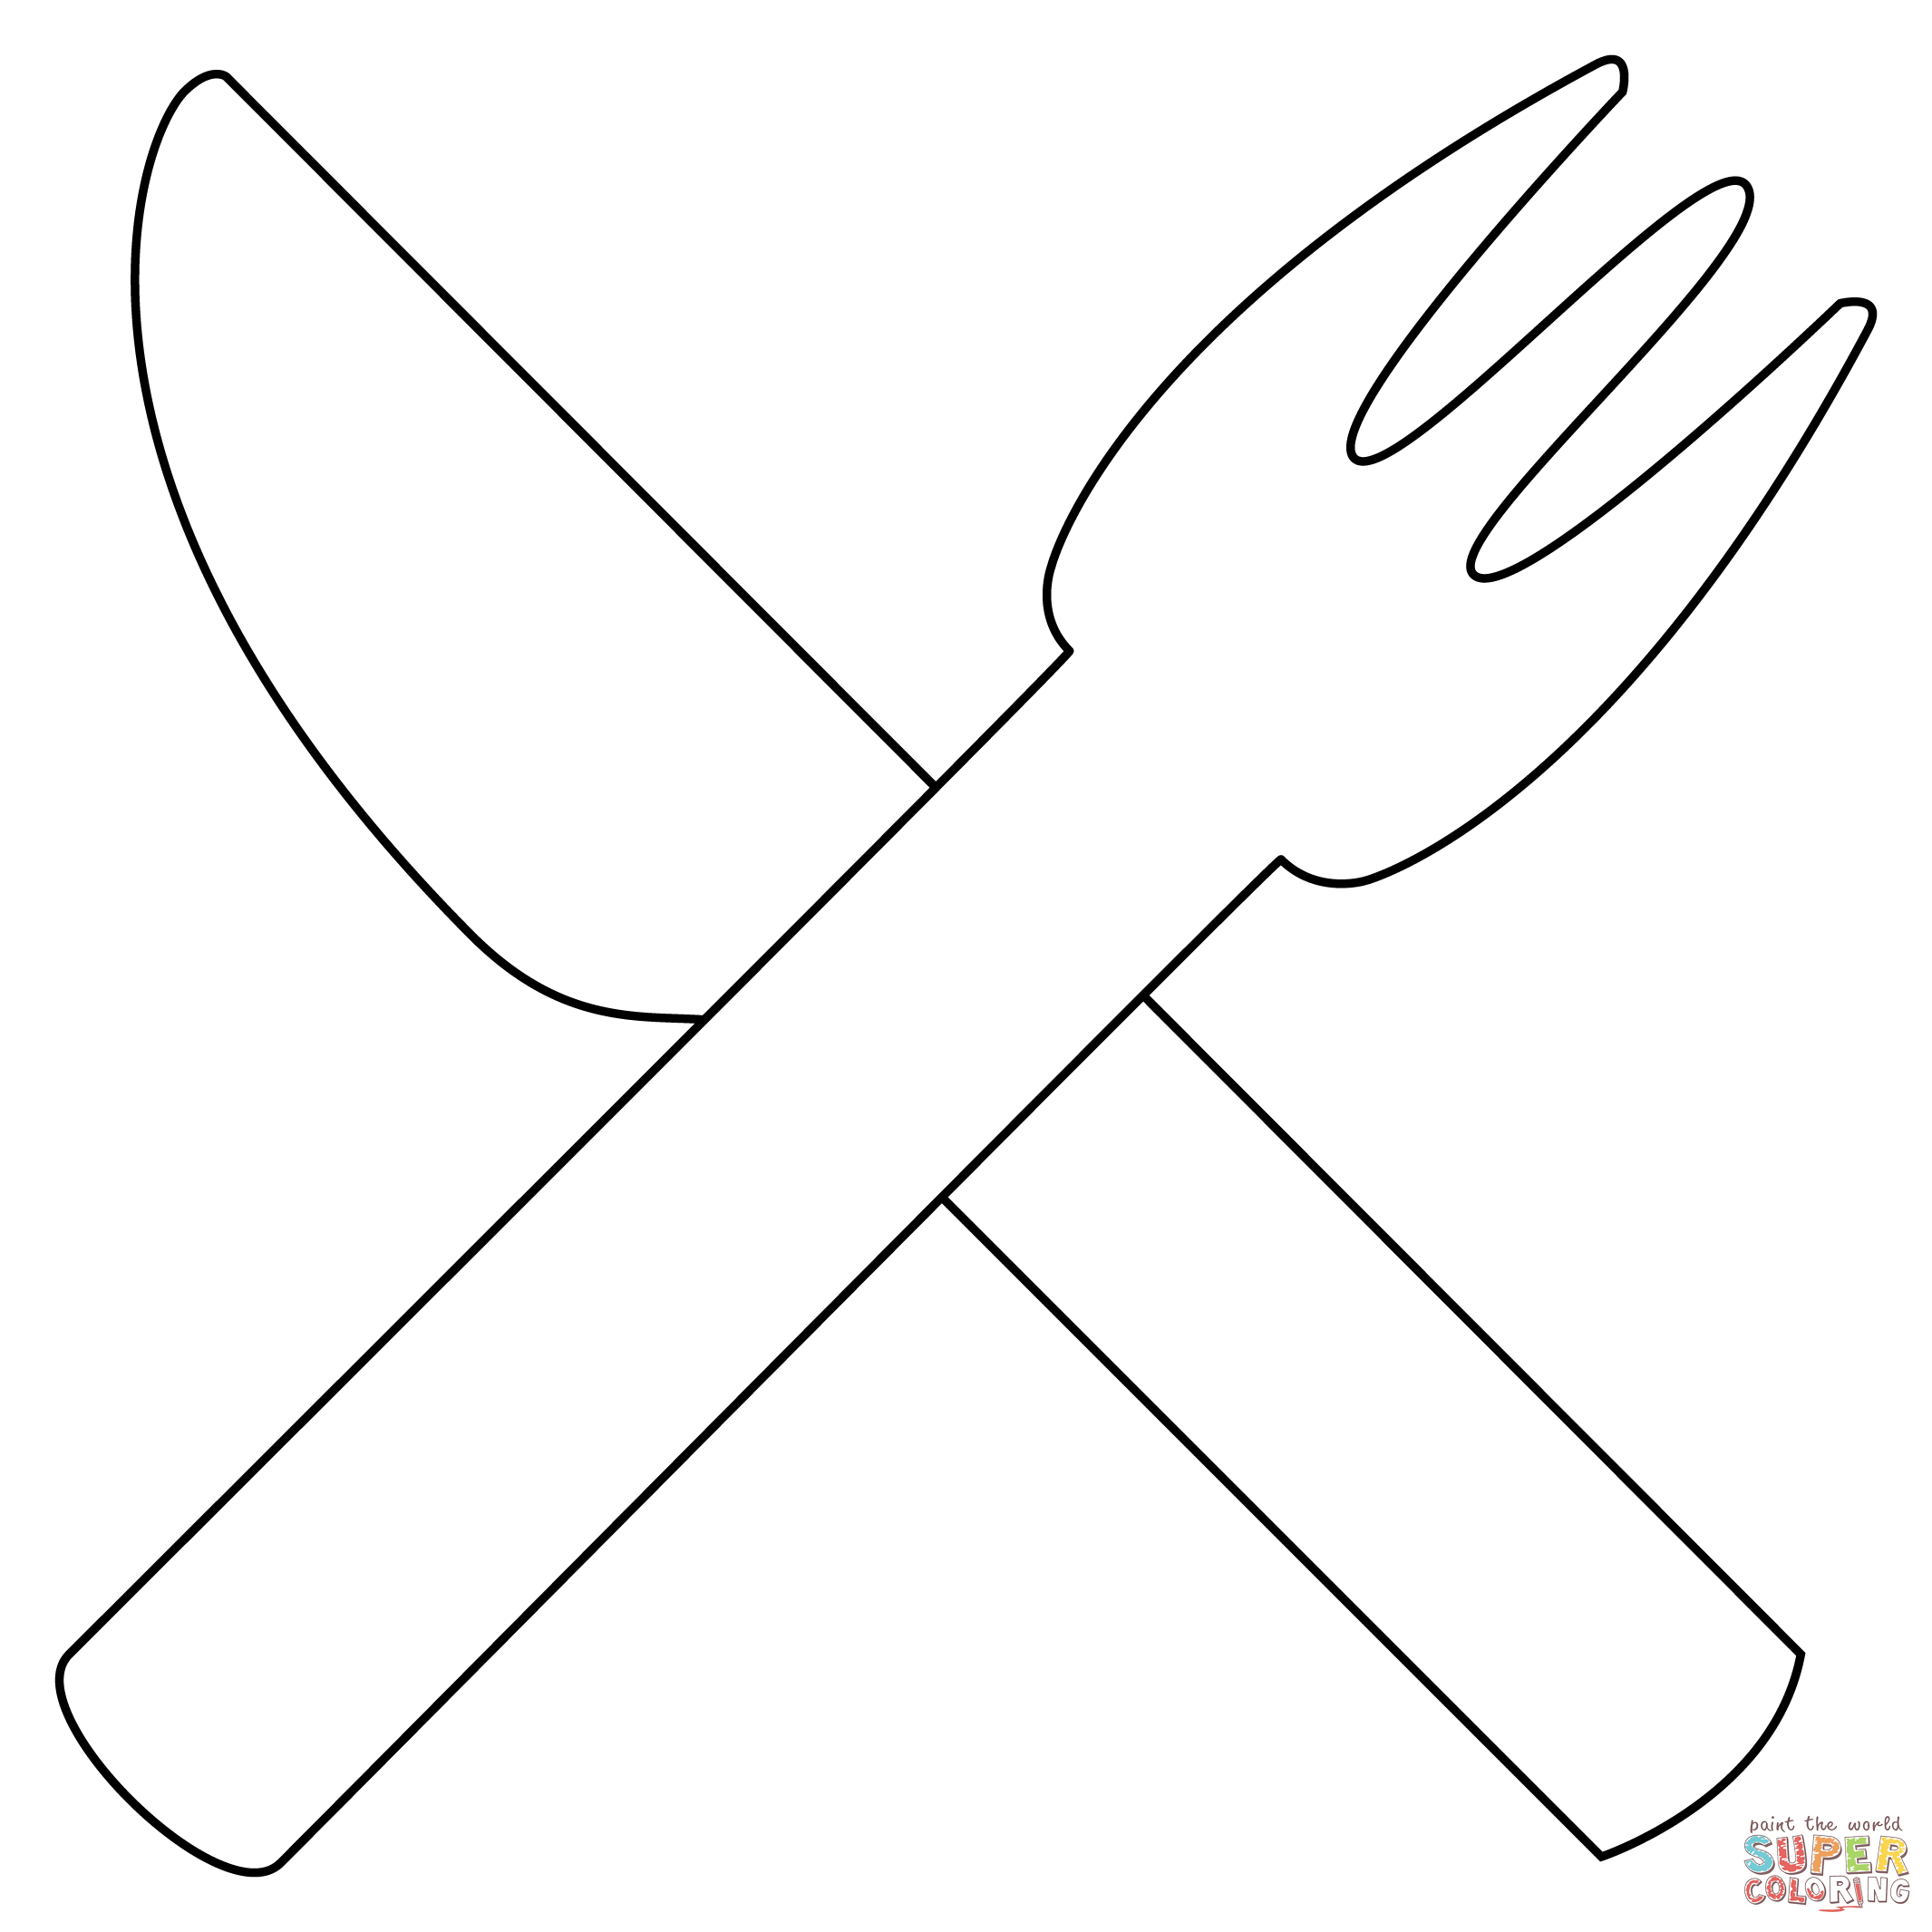 Fork and knife coloring page free printable coloring pages